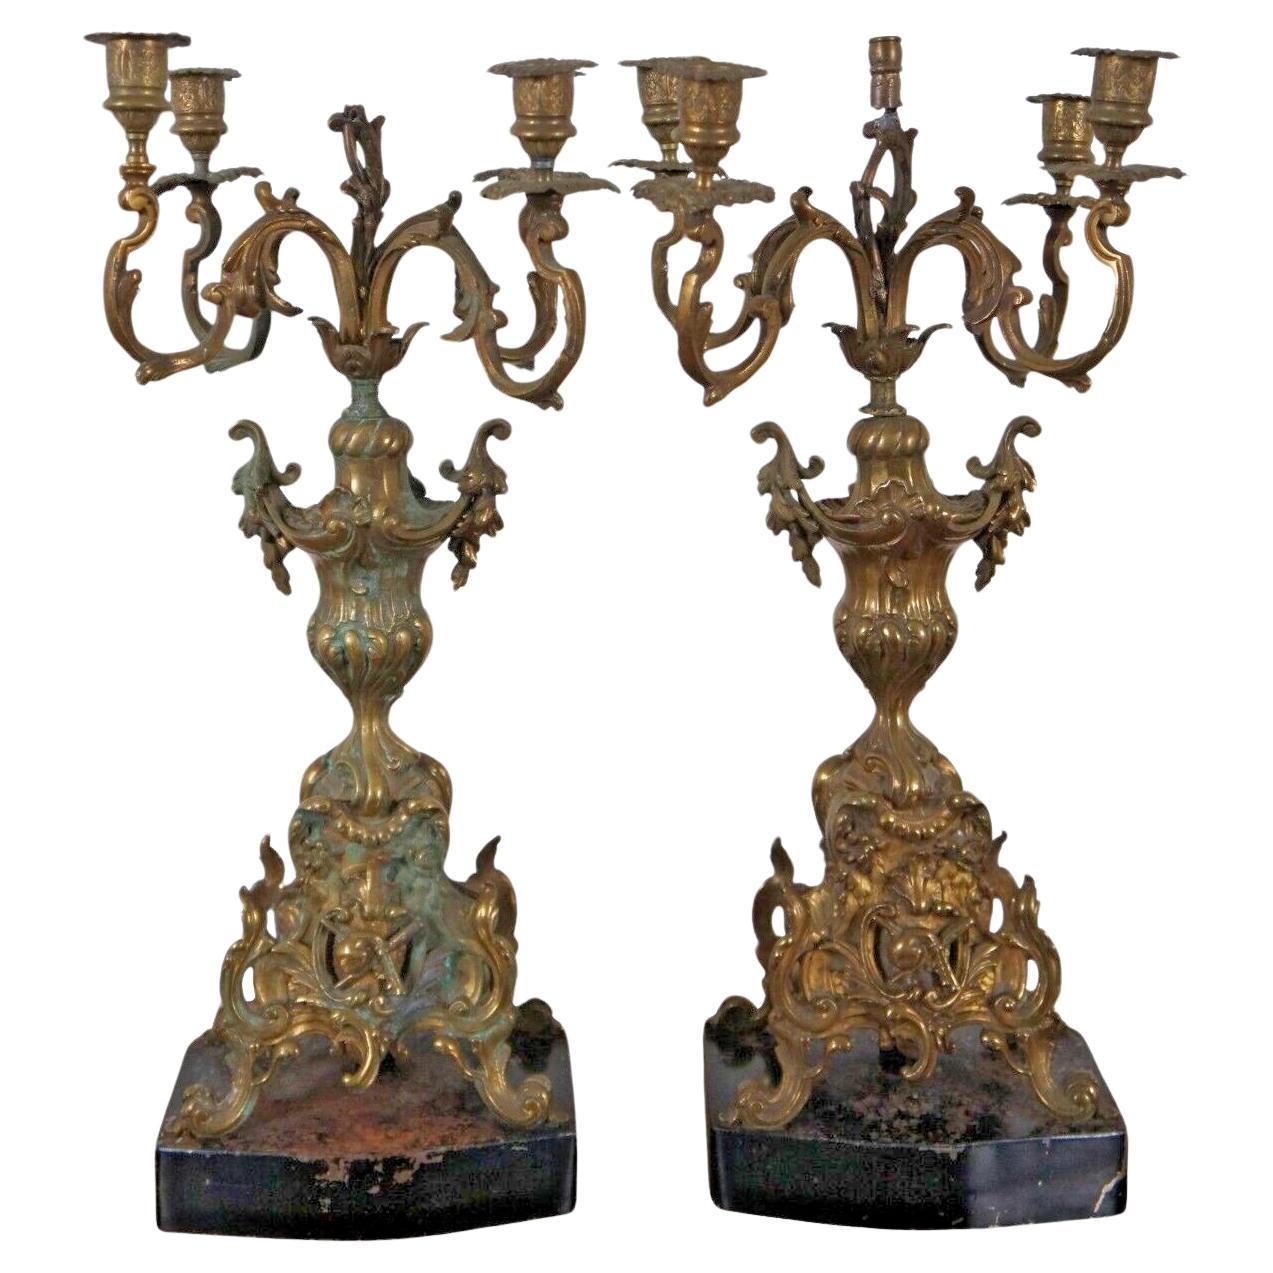 2 Antique Baroque 4 Arm Candelabras Candle Holders Converted Lamps 20" For Sale